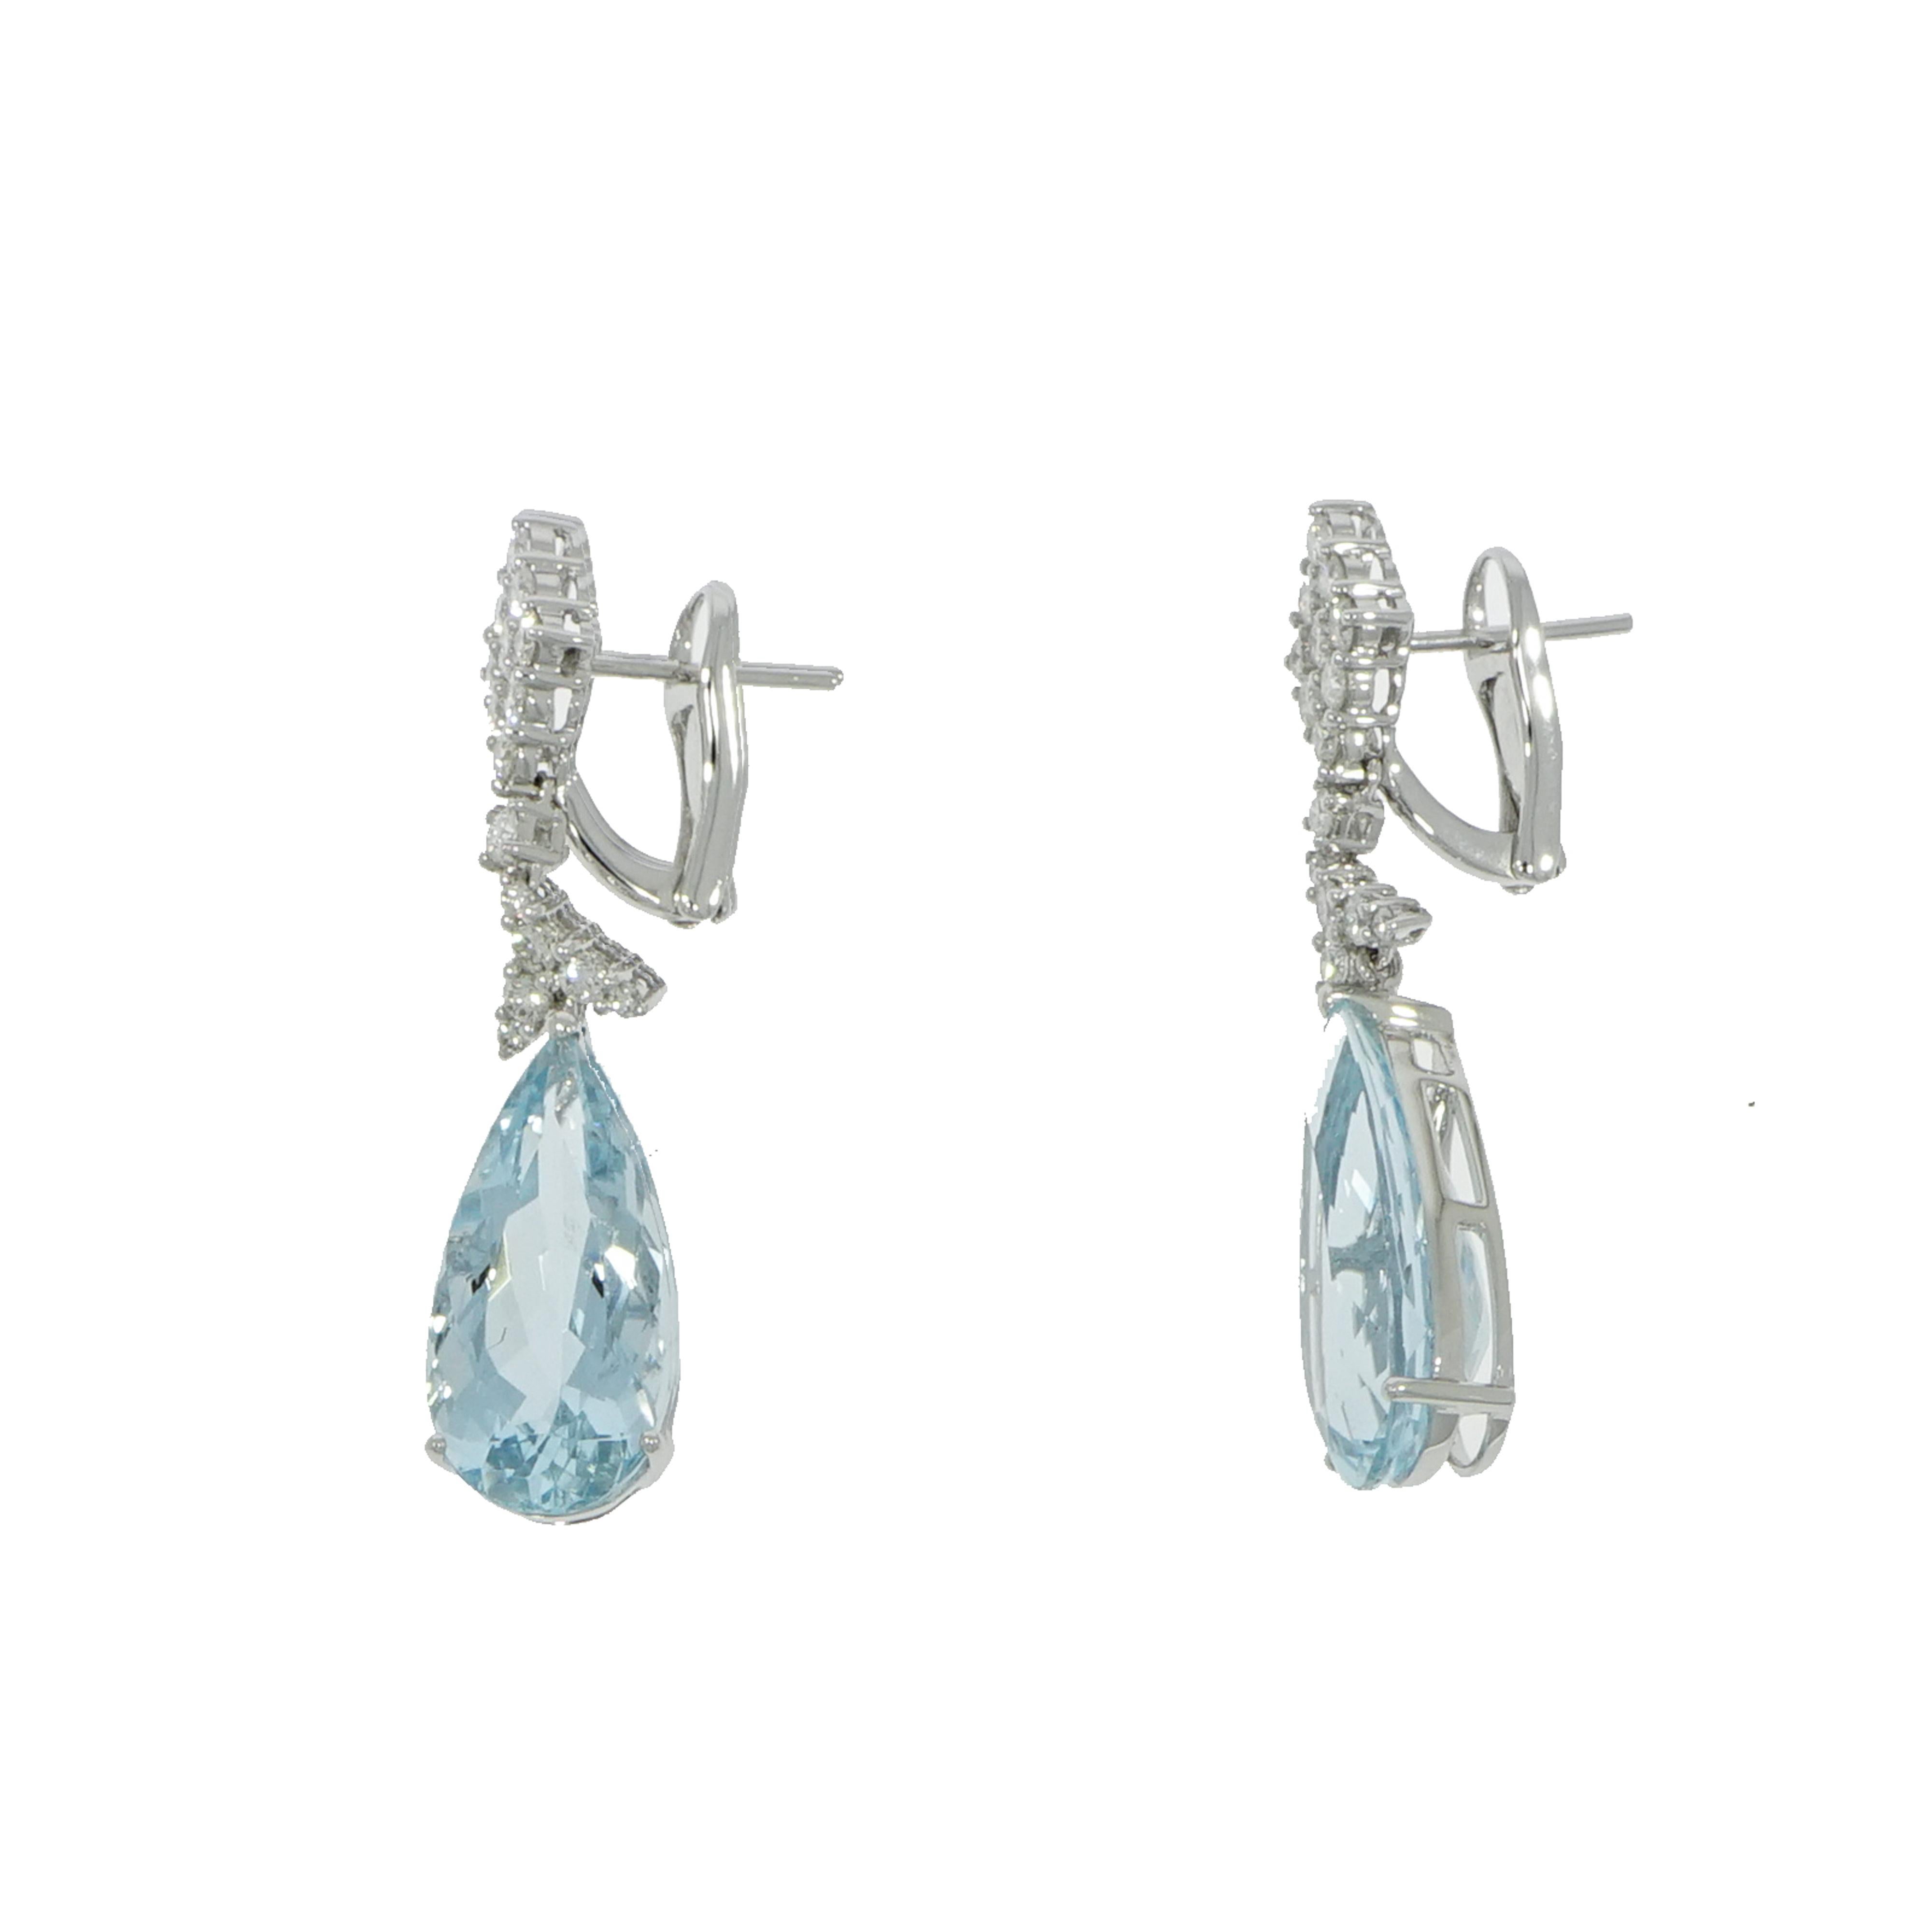 Step up any summer look with a long and lean pair of earring, just like these soft blue shade of Aquamarine, accented by diamonds to add sparkle. This style elongates the face and is extremely on-trend for the season. 
Handcrafted in Italy